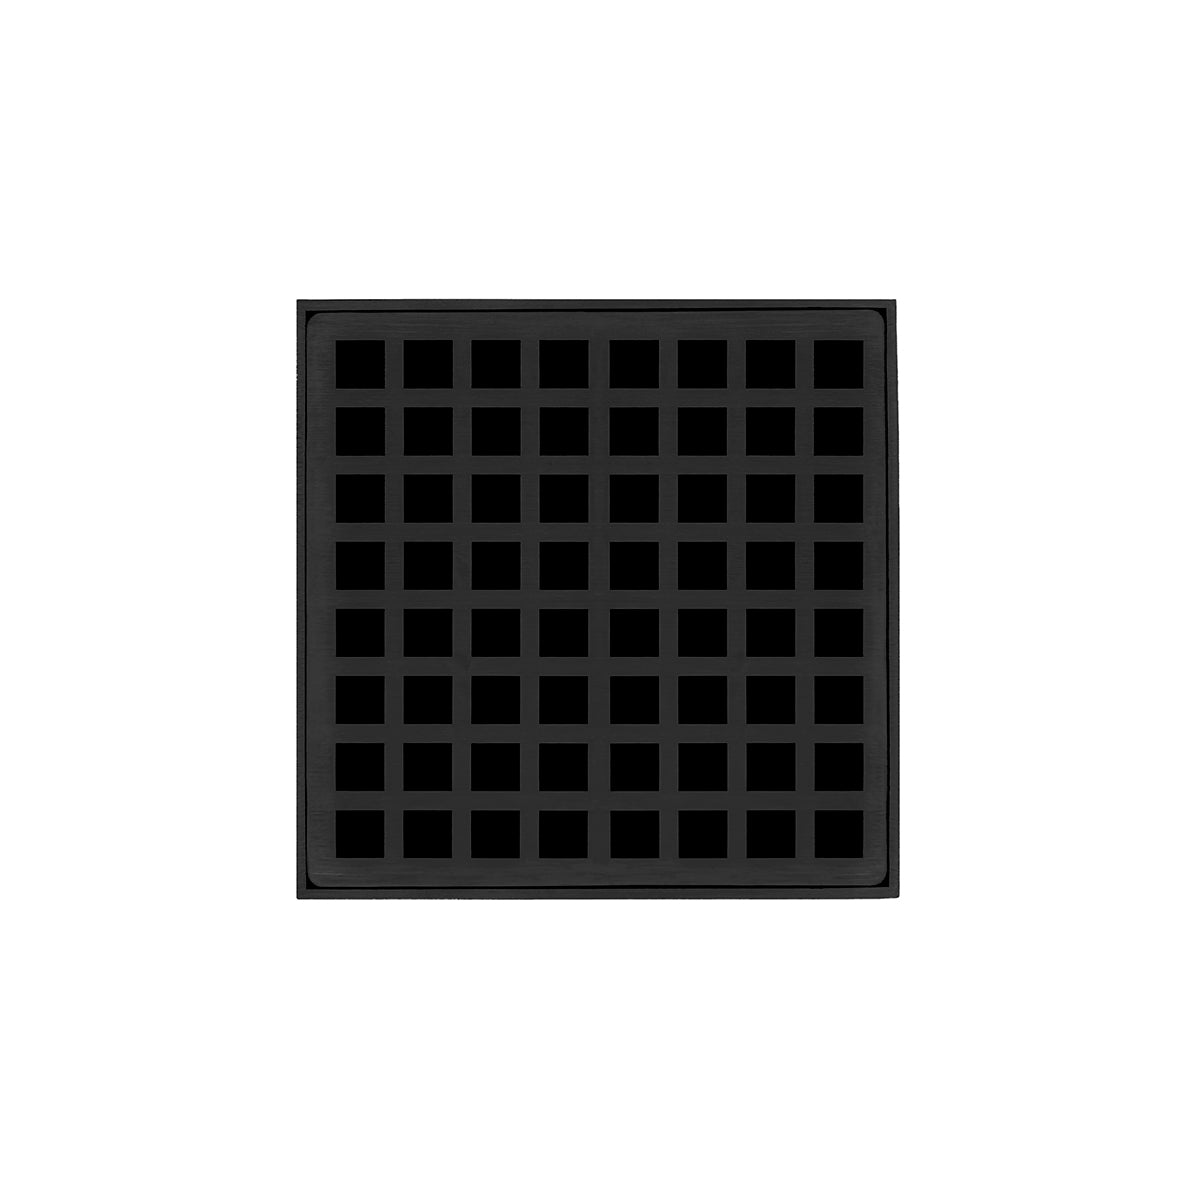 Infinity Drain 5" x 5" QD 5 Premium Center Drain Kit with Squares Pattern Decorative Plate with PVC Drain Body, 2" Outlet